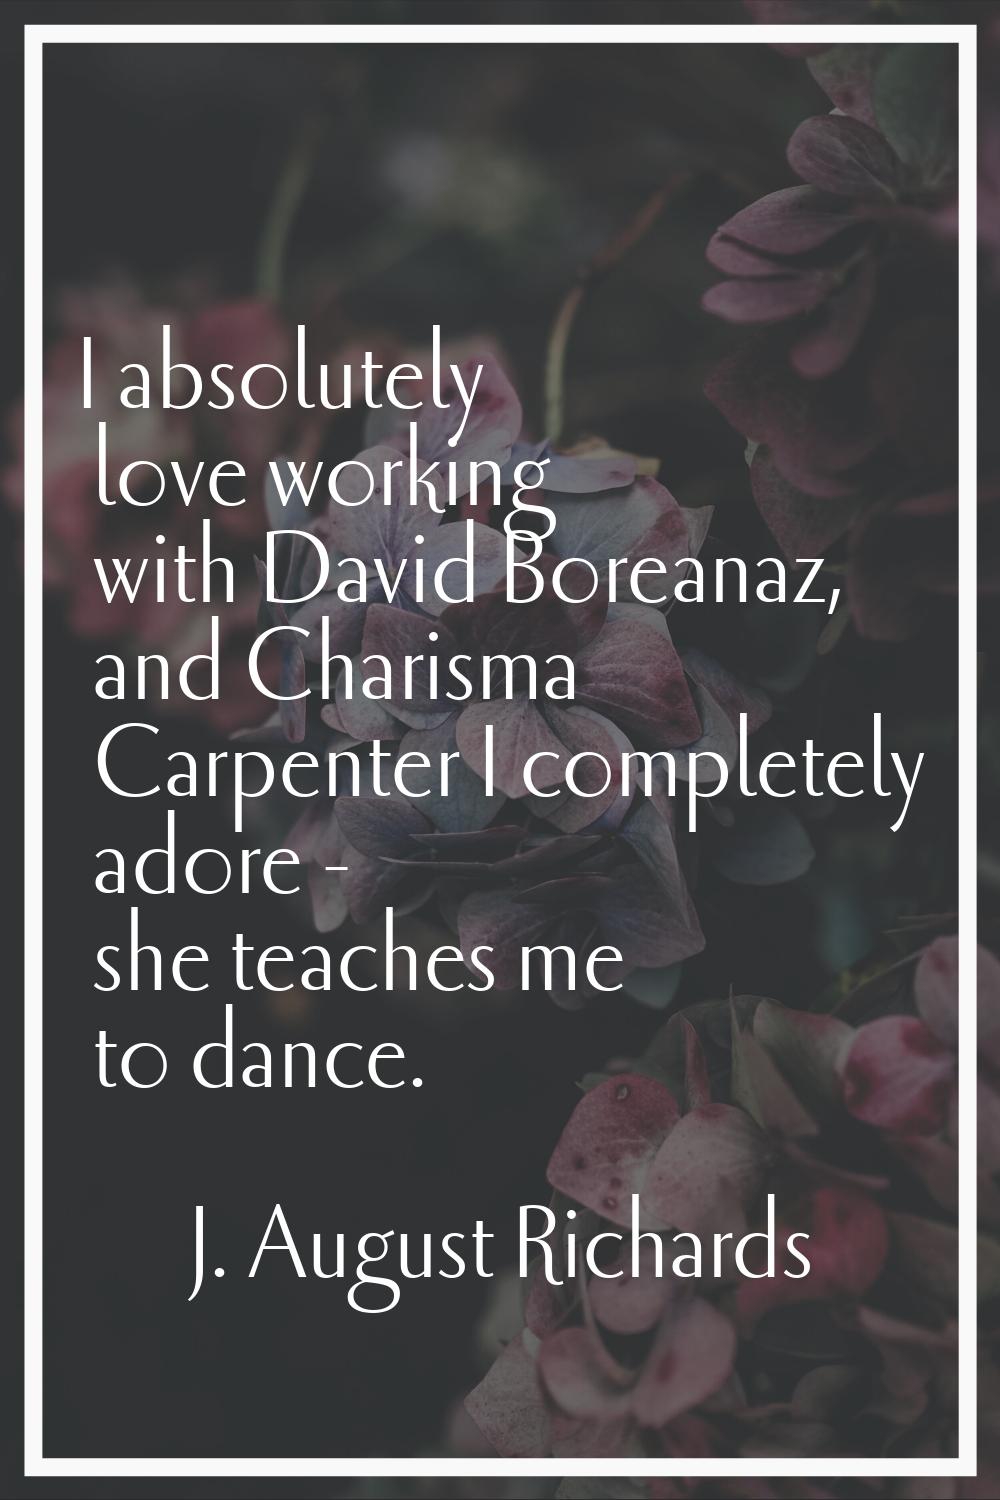 I absolutely love working with David Boreanaz, and Charisma Carpenter I completely adore - she teac